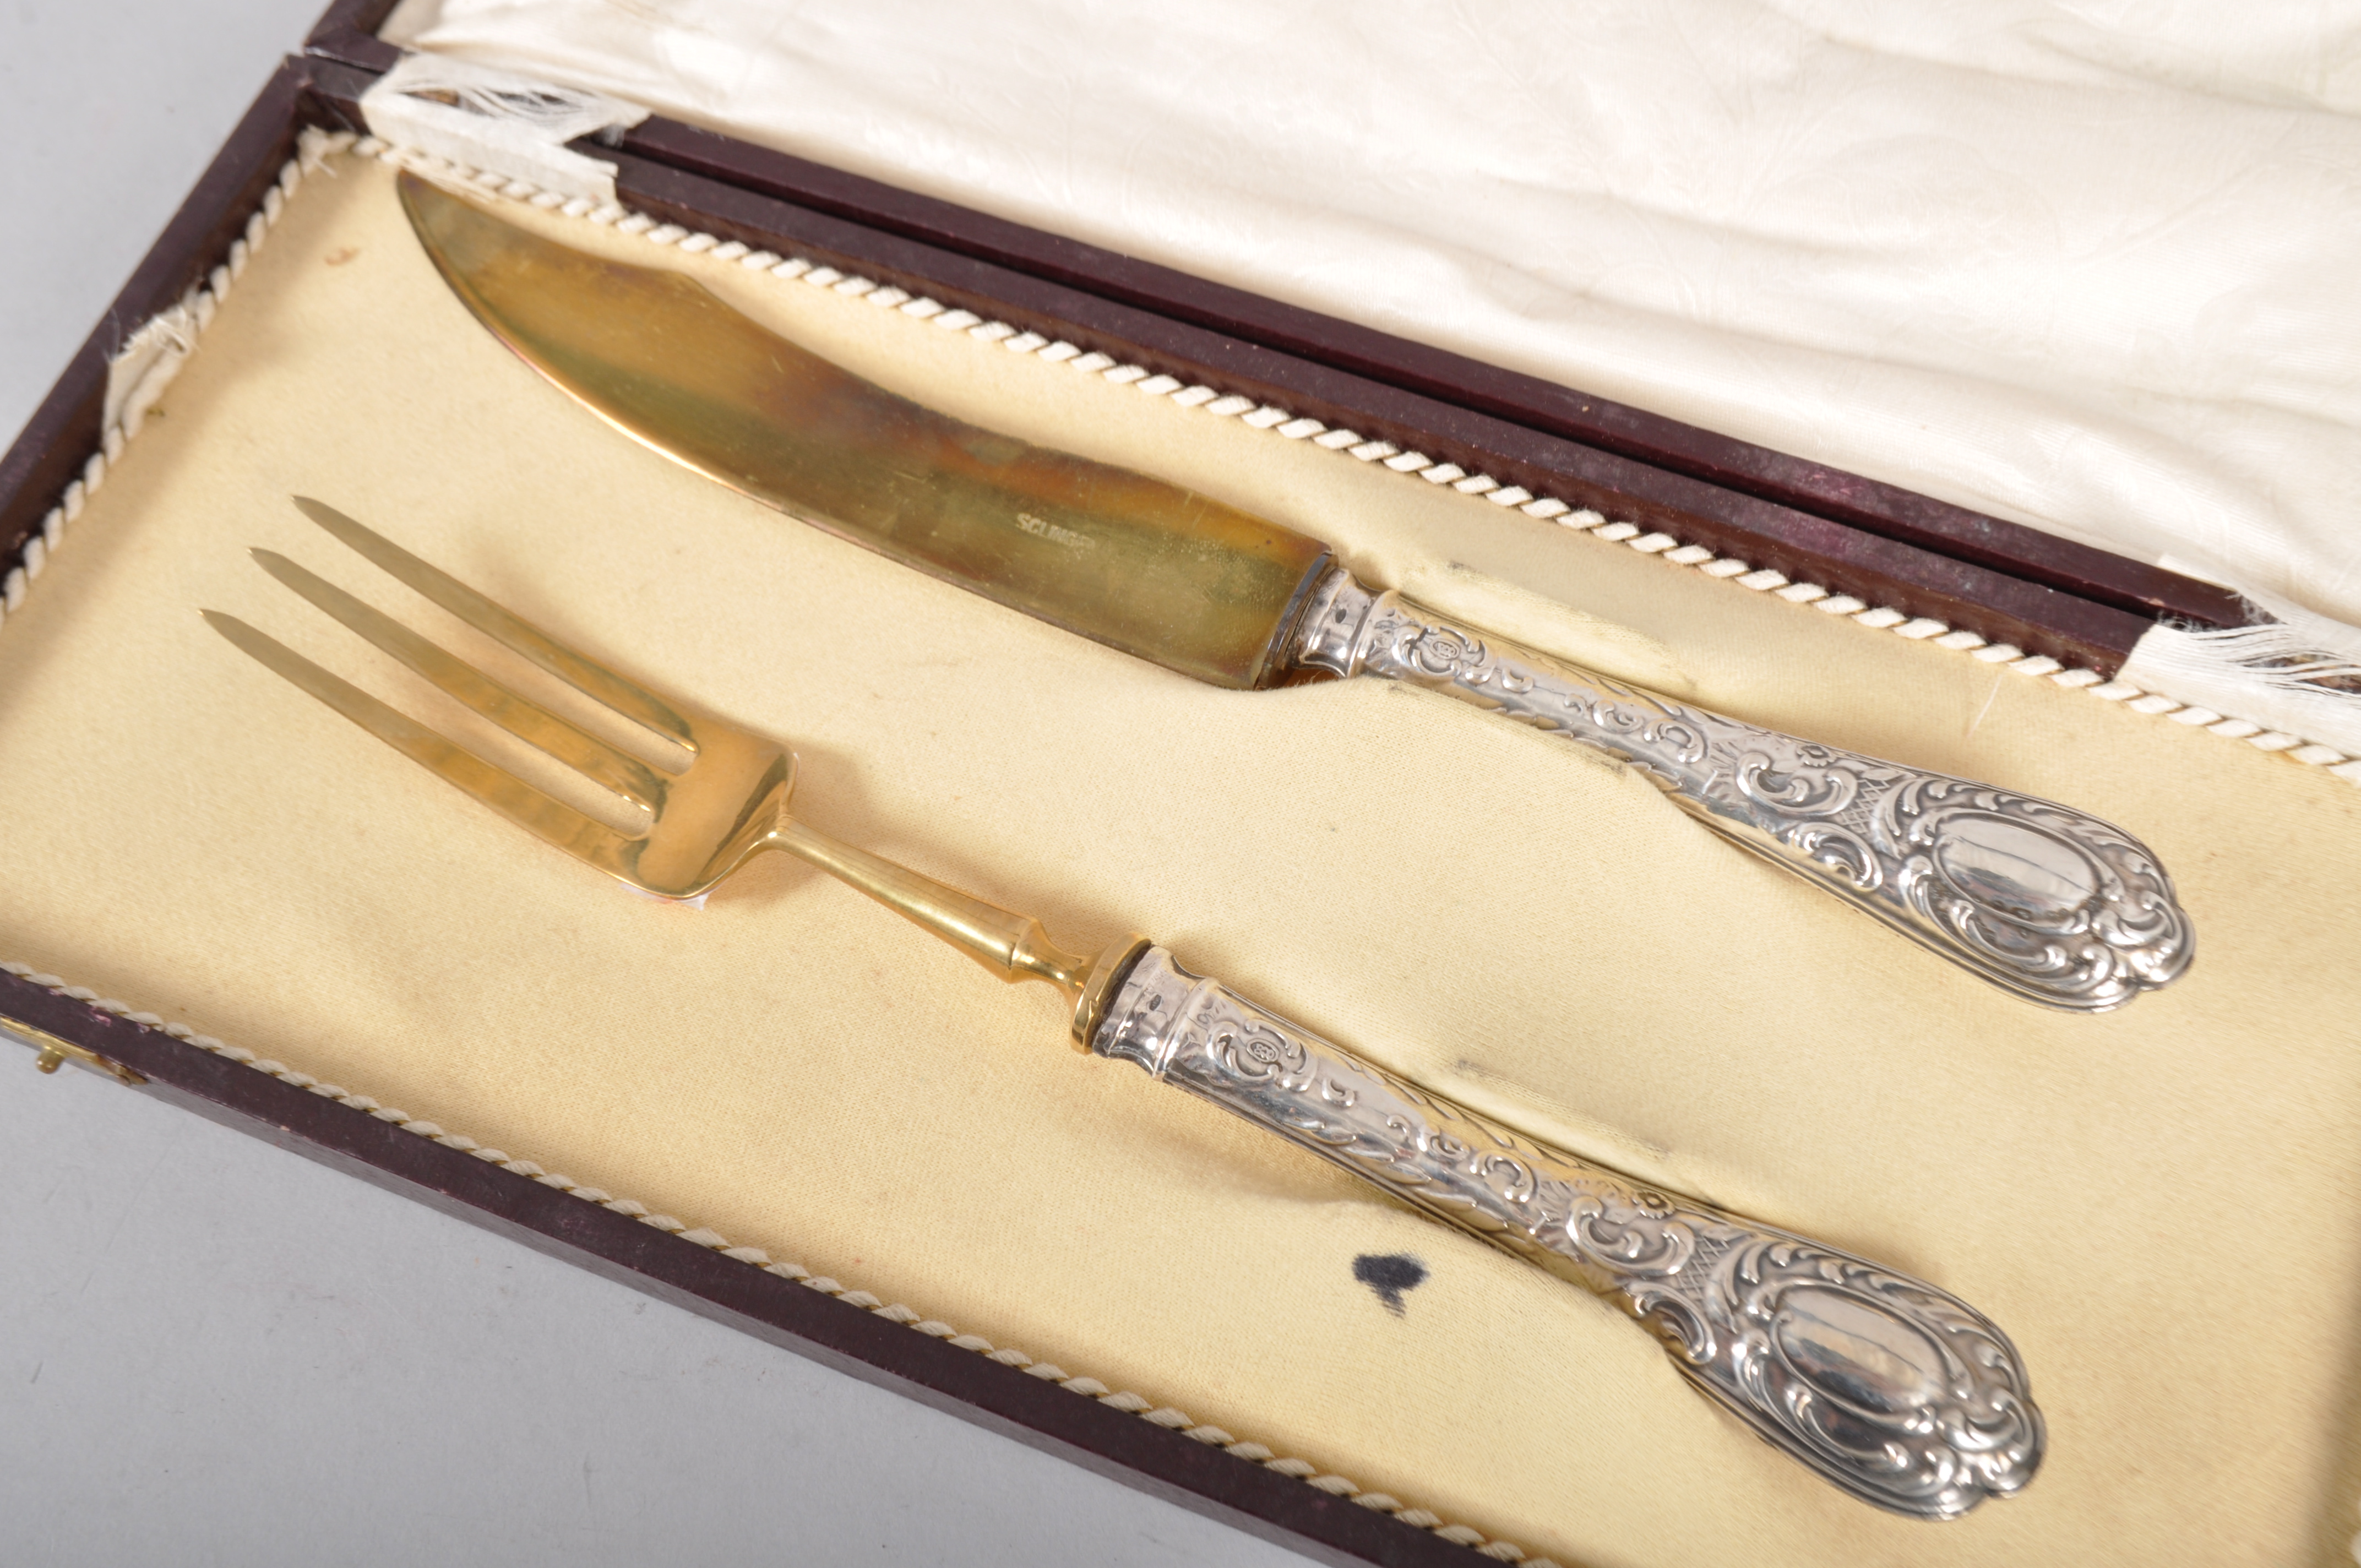 A Solingen gilded serving knife and fork, with embossed white metal handle, - Image 4 of 4